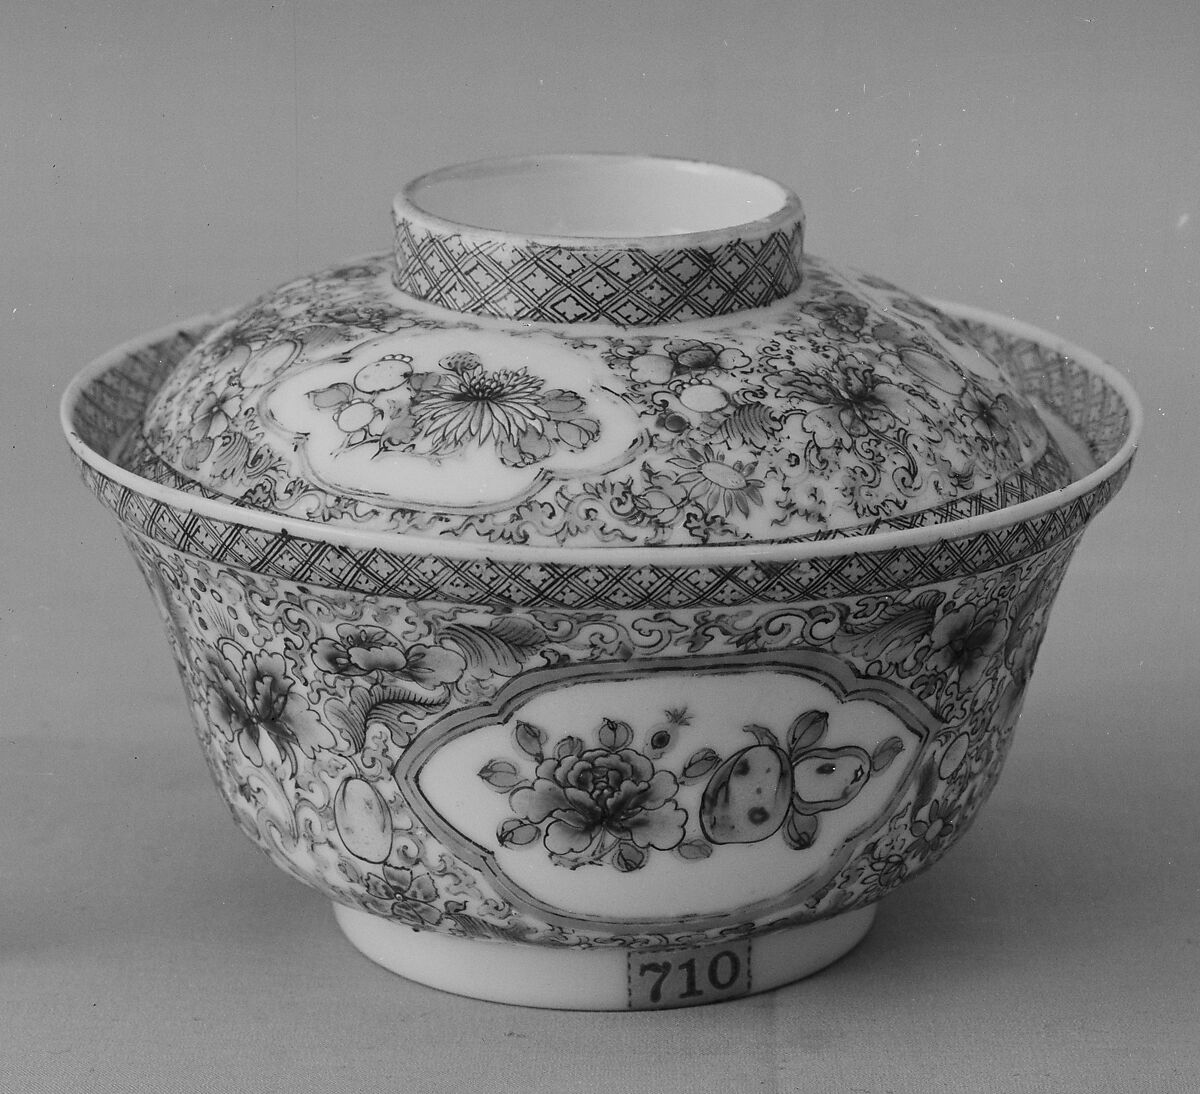 Covered Bowl, Porcelain painted in overglaze famille rose enamels, China 